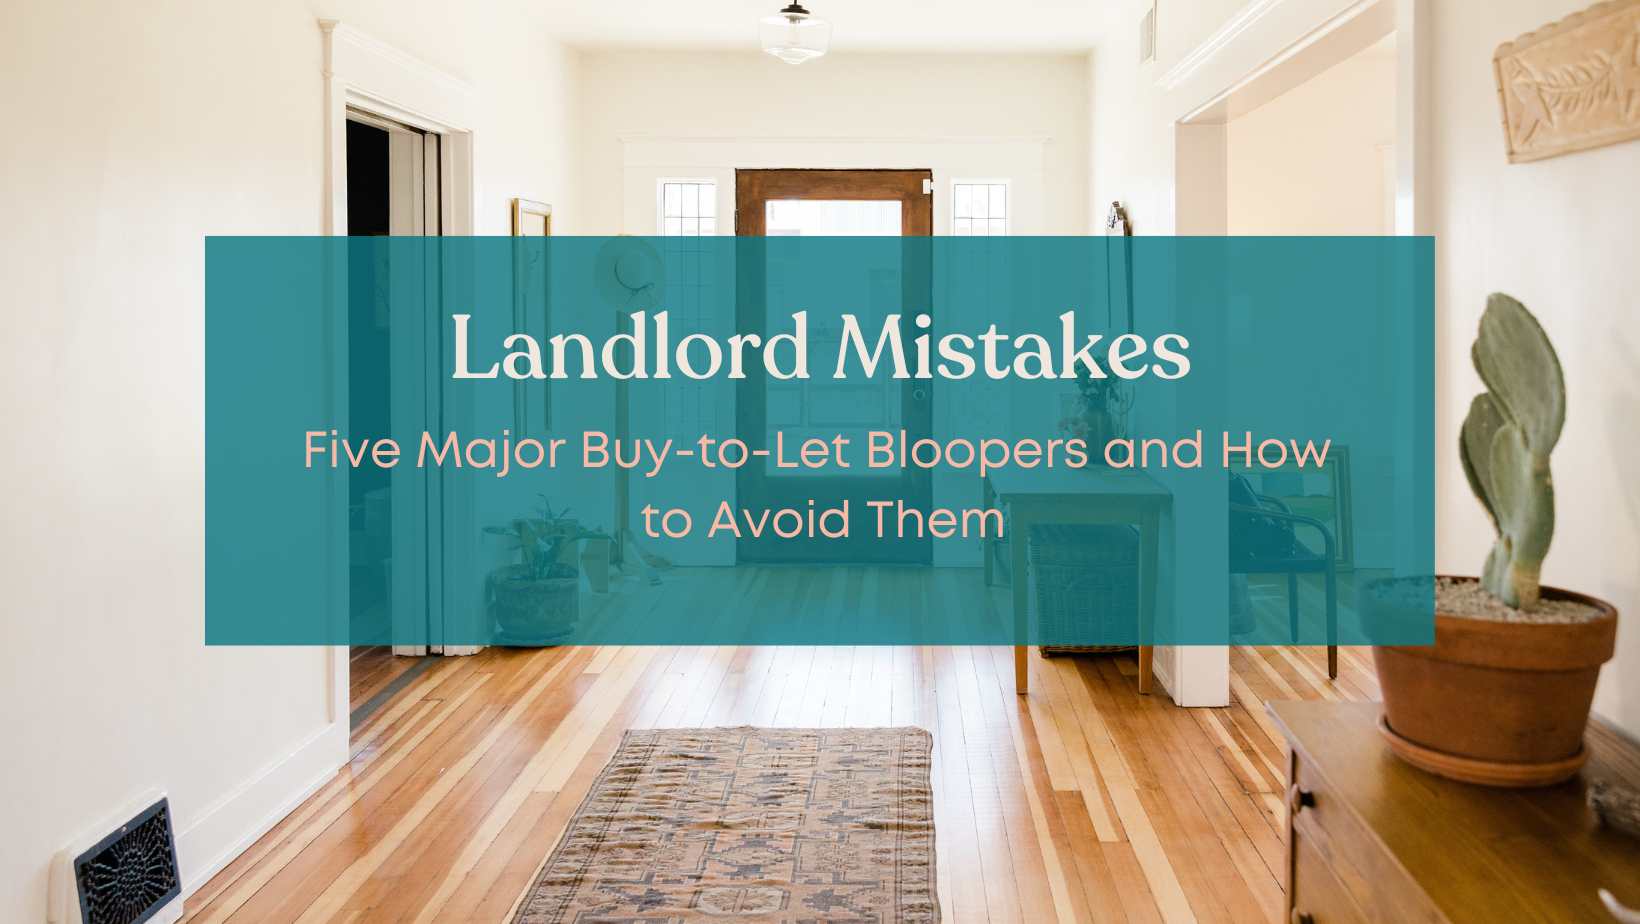 Buy-to-Let Bloopers and How to Avoid Them